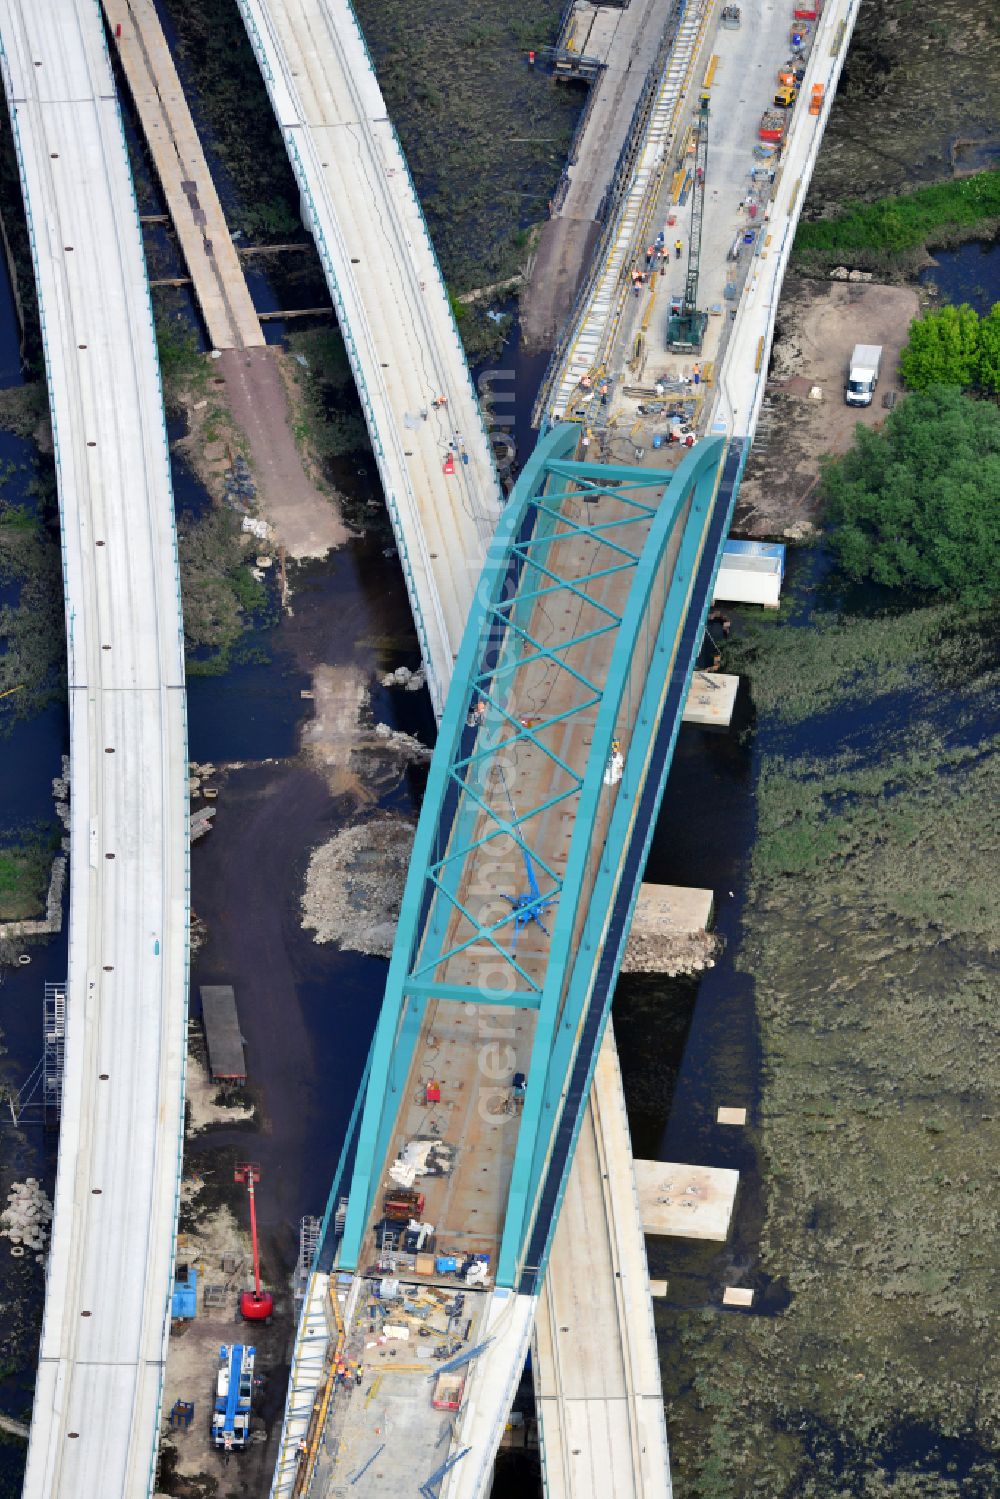 Aerial image Rattmannsdorf - Construction site of viaduct of the railway bridge structure to route the railway tracks in Rattmannsdorf in the state Saxony-Anhalt, Germany